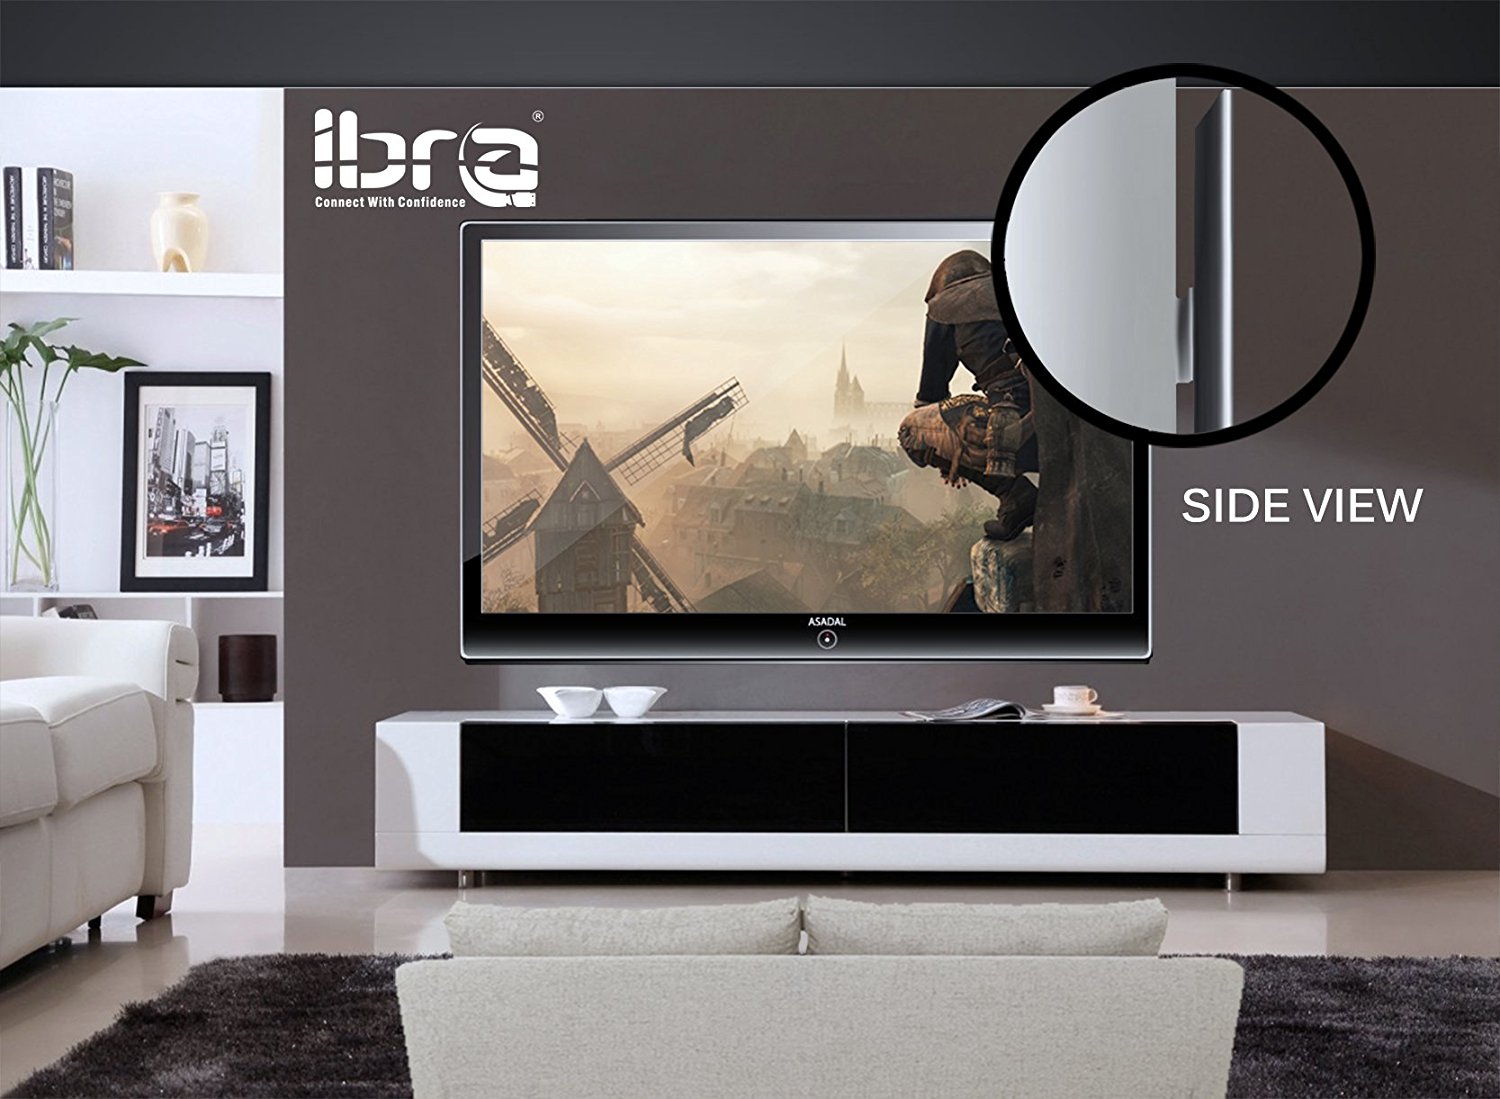 IBRA Ultra Slim Wall Mount Bracket System for Samsung, LG and Philips LED TV. Fits most 13" to 70" Screens